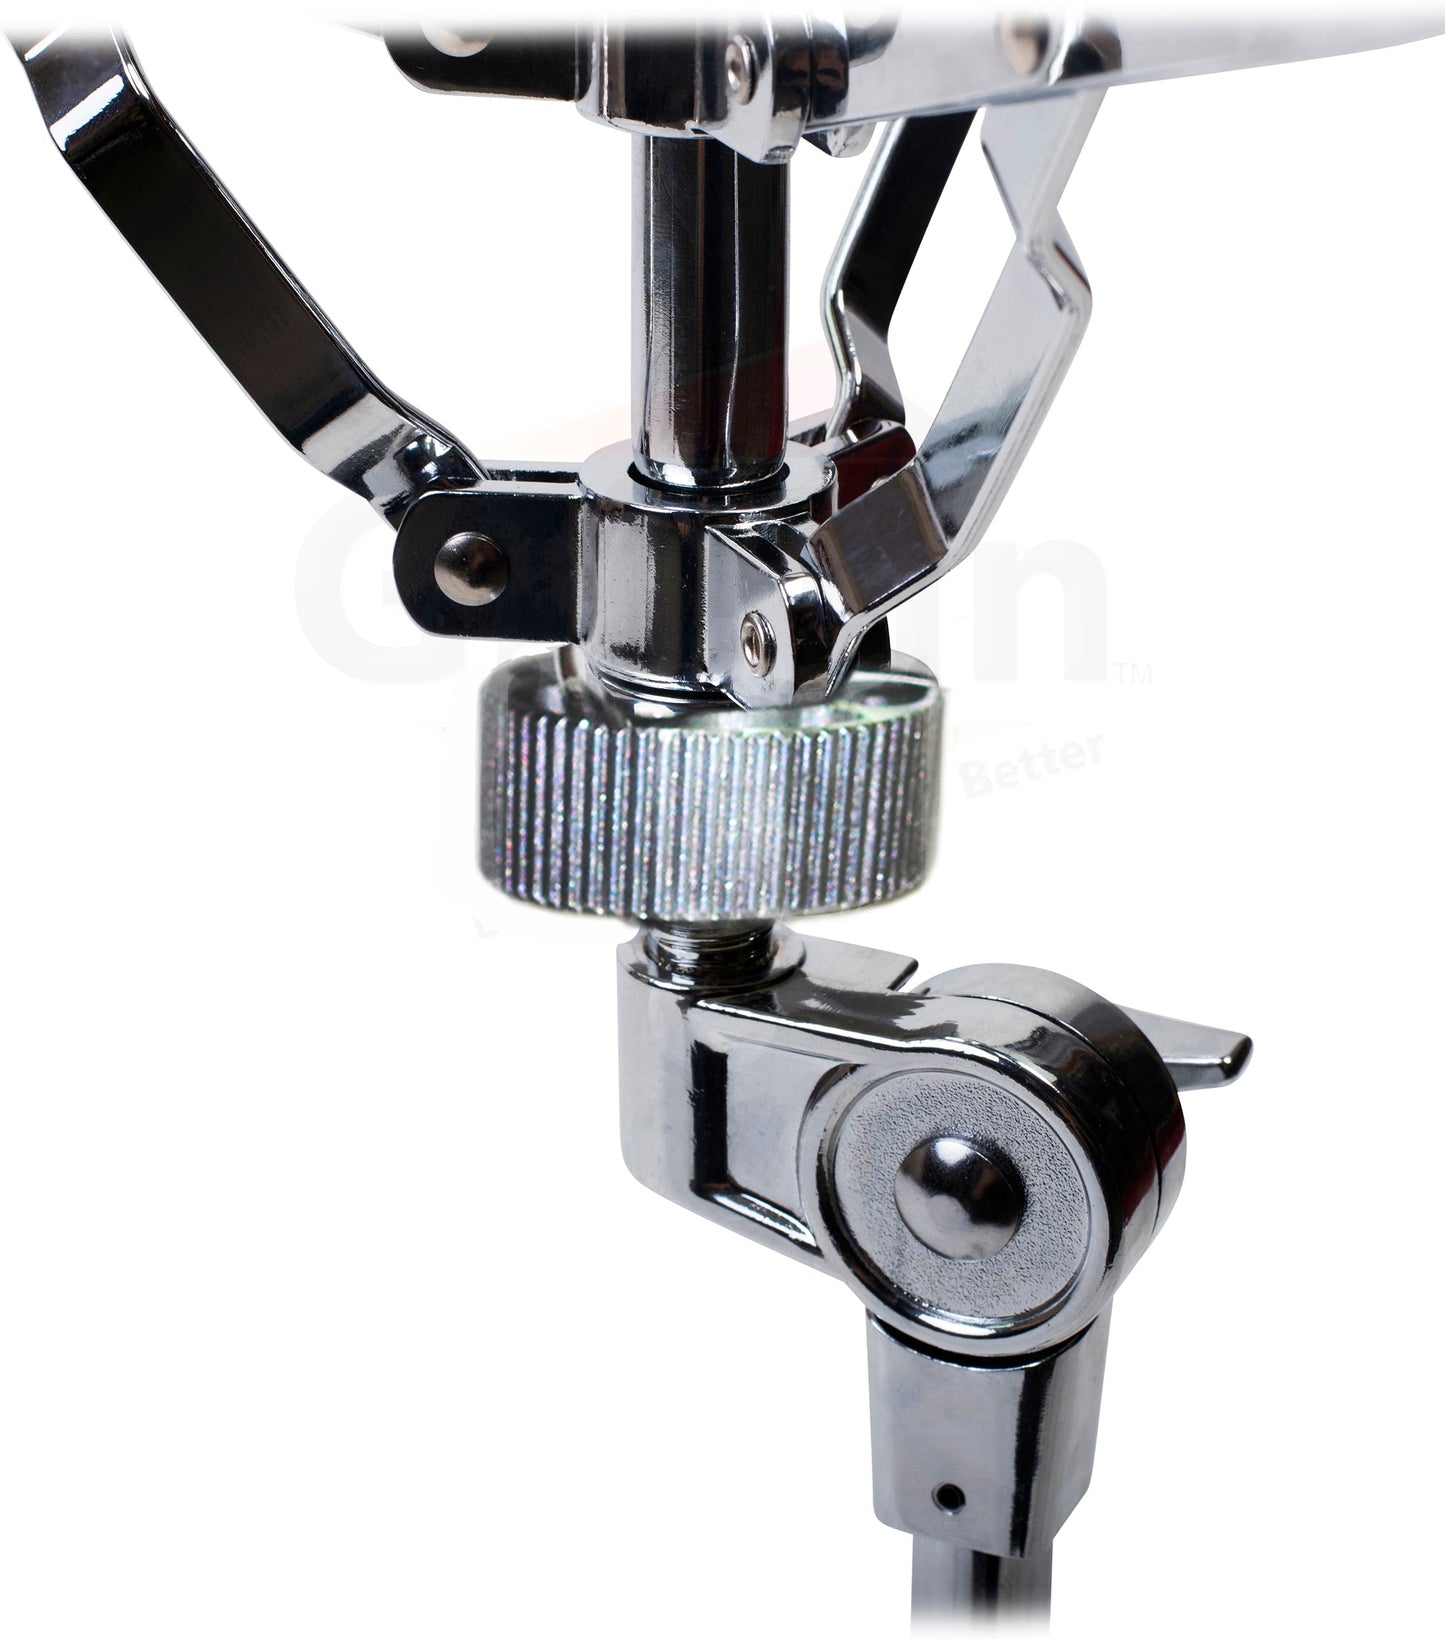 Snare Drum Stand by GRIFFIN - Deluxe Percussion Hardware Base Kit - Double Braced, Light Weight